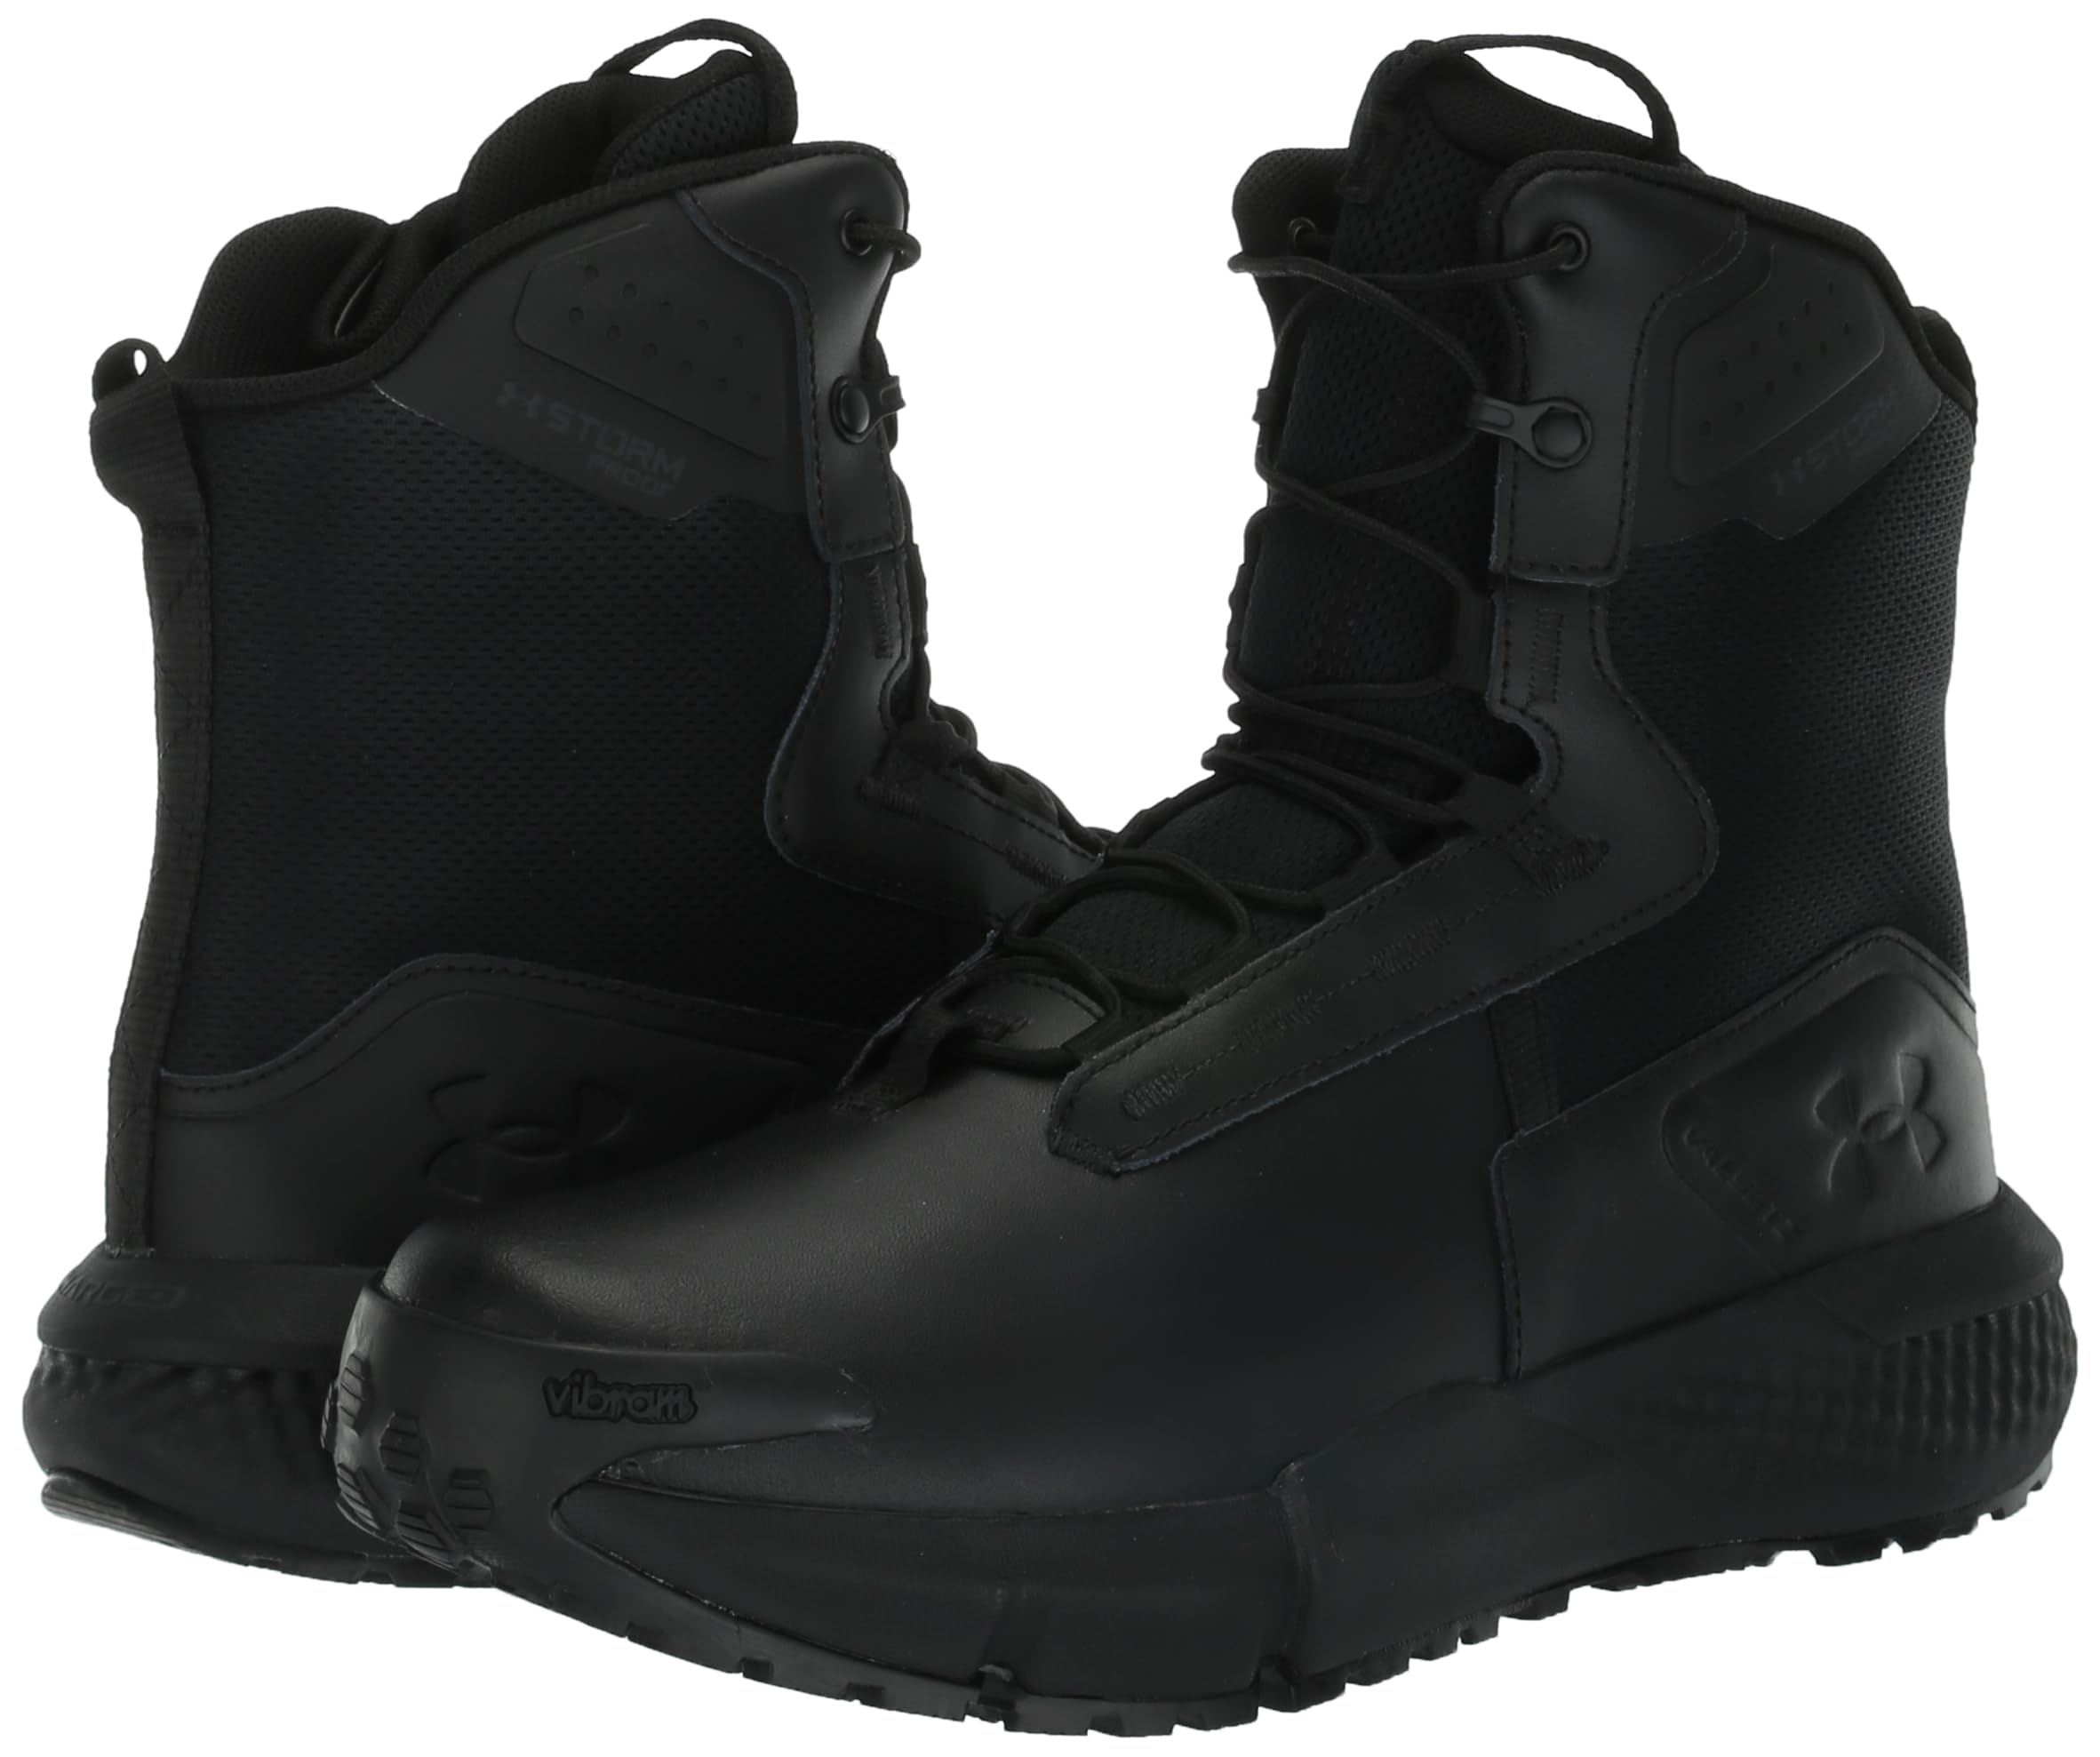 Under Armour Men's Charged Valsetz Zip Waterproof Military and Tactical Boot